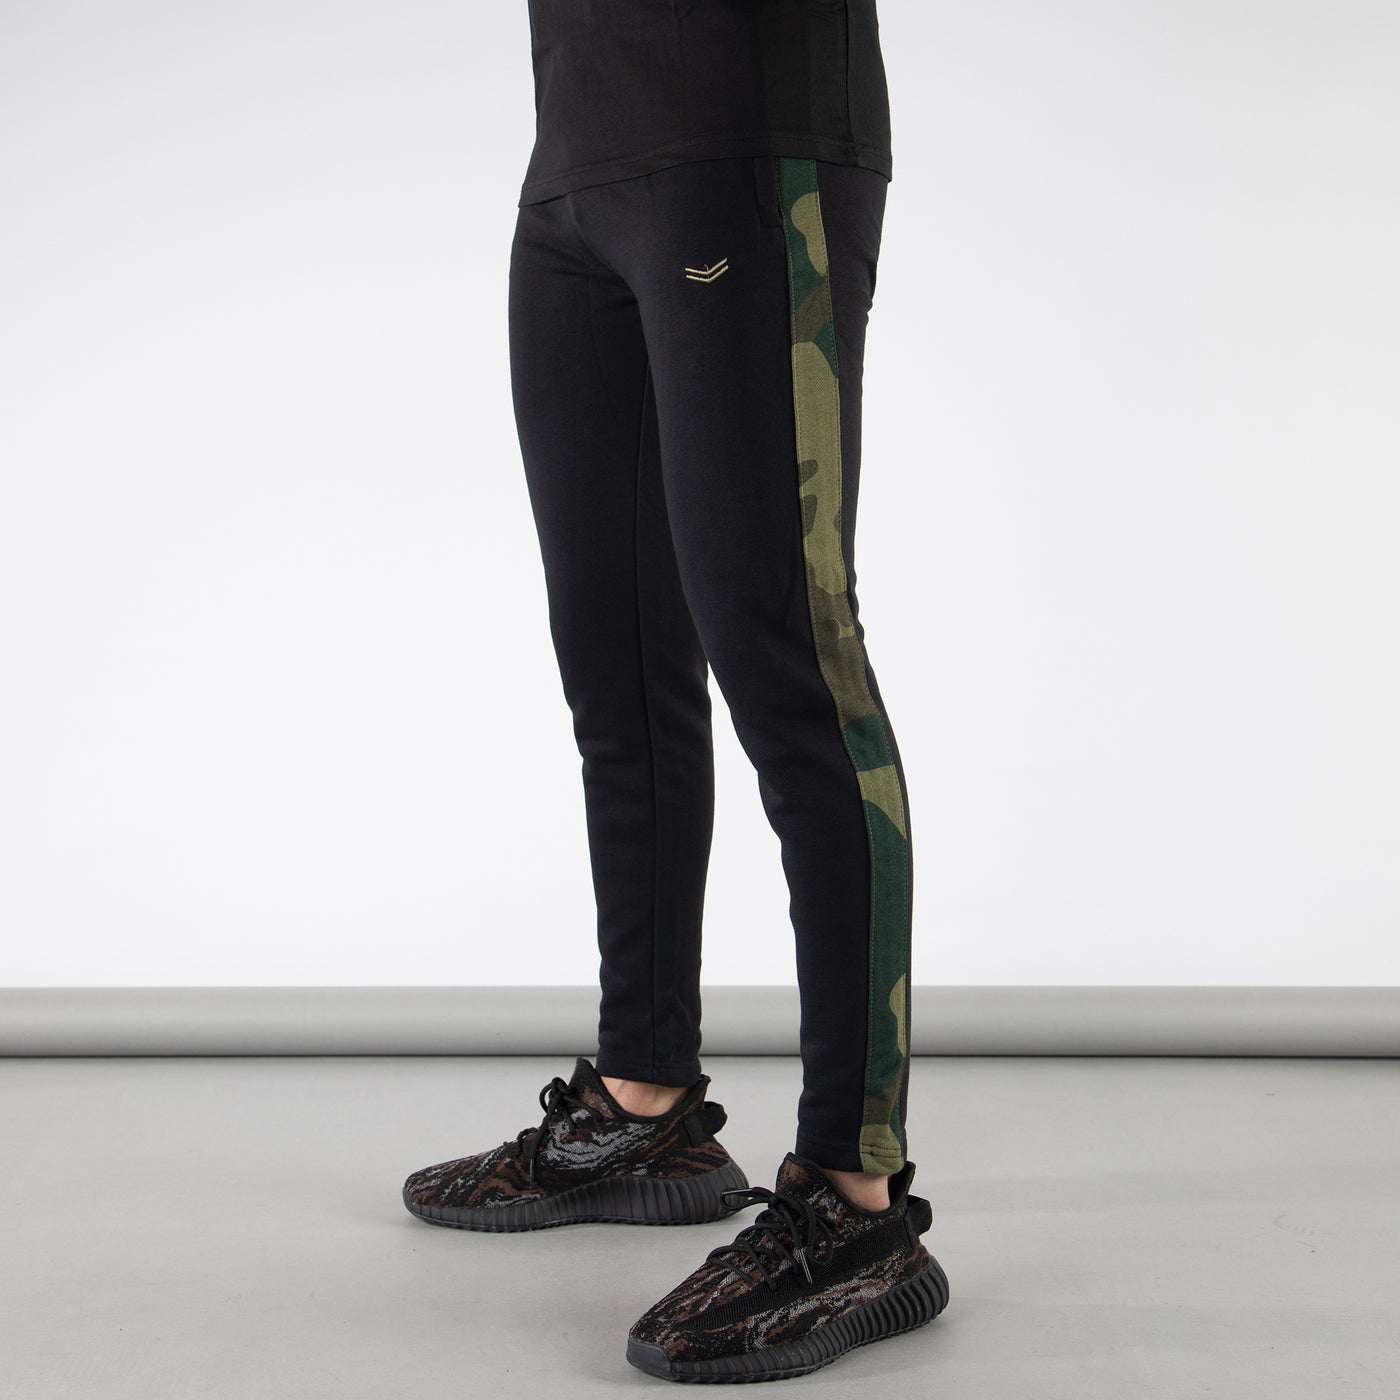 Black Bottoms with Green Camo Panels